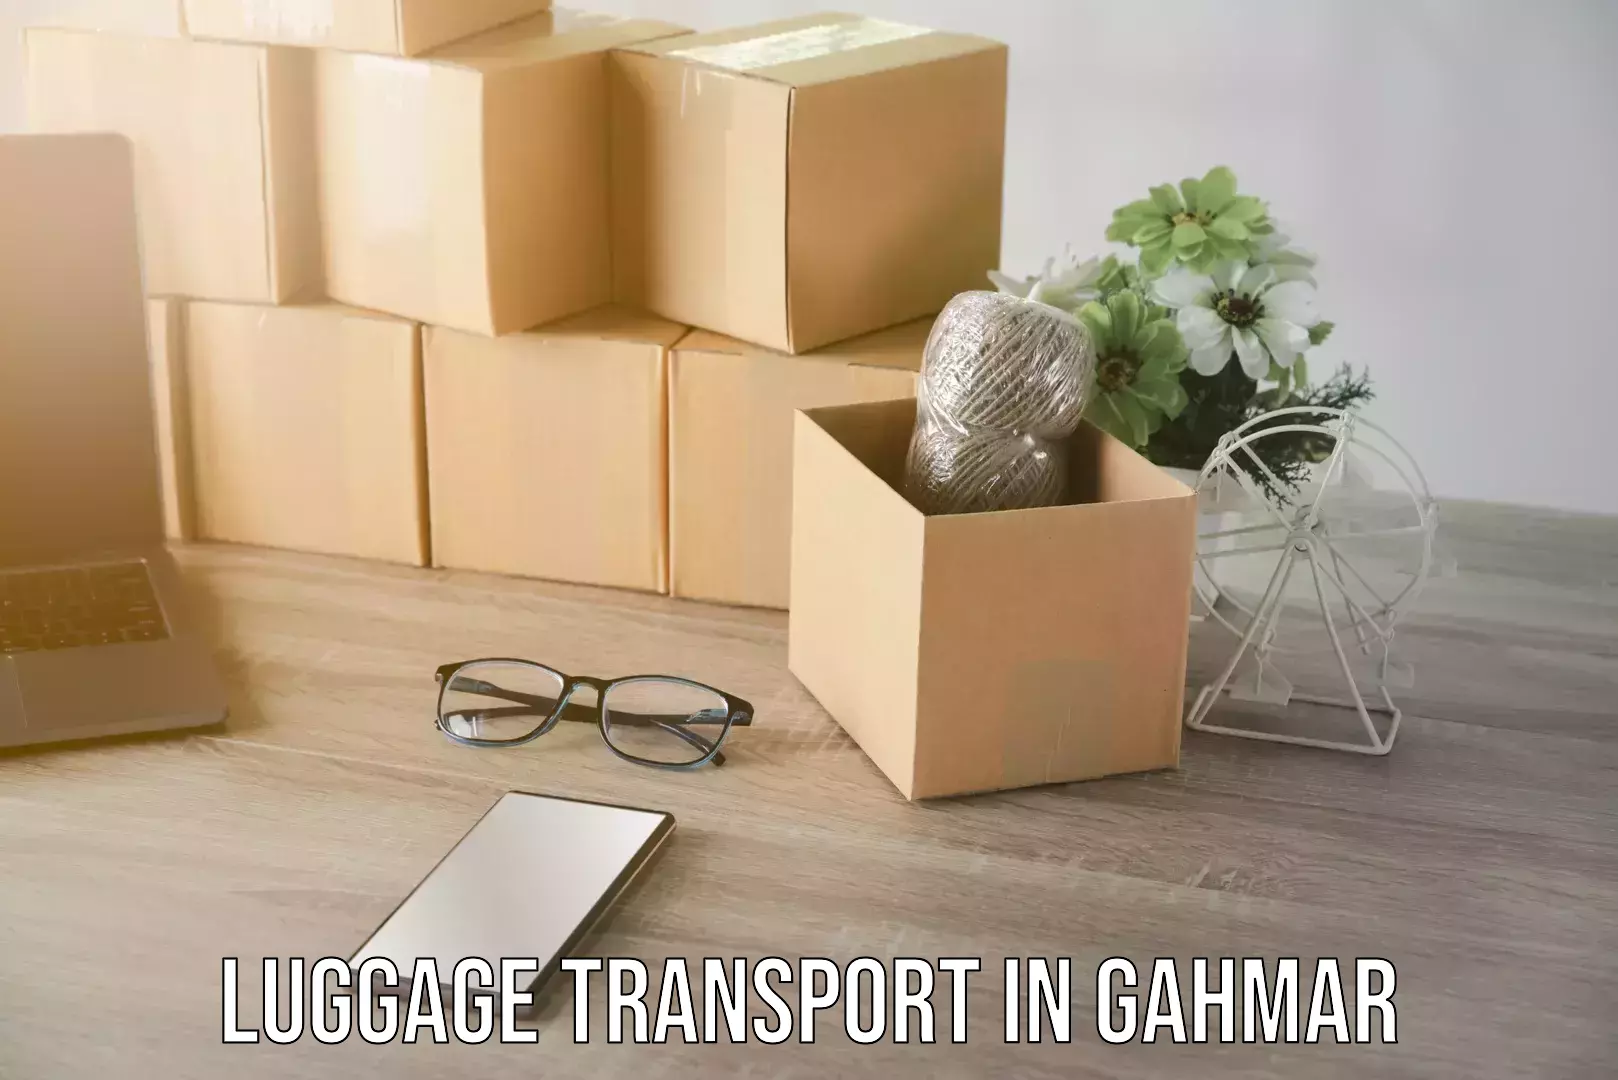 Luggage transport consulting in Gahmar